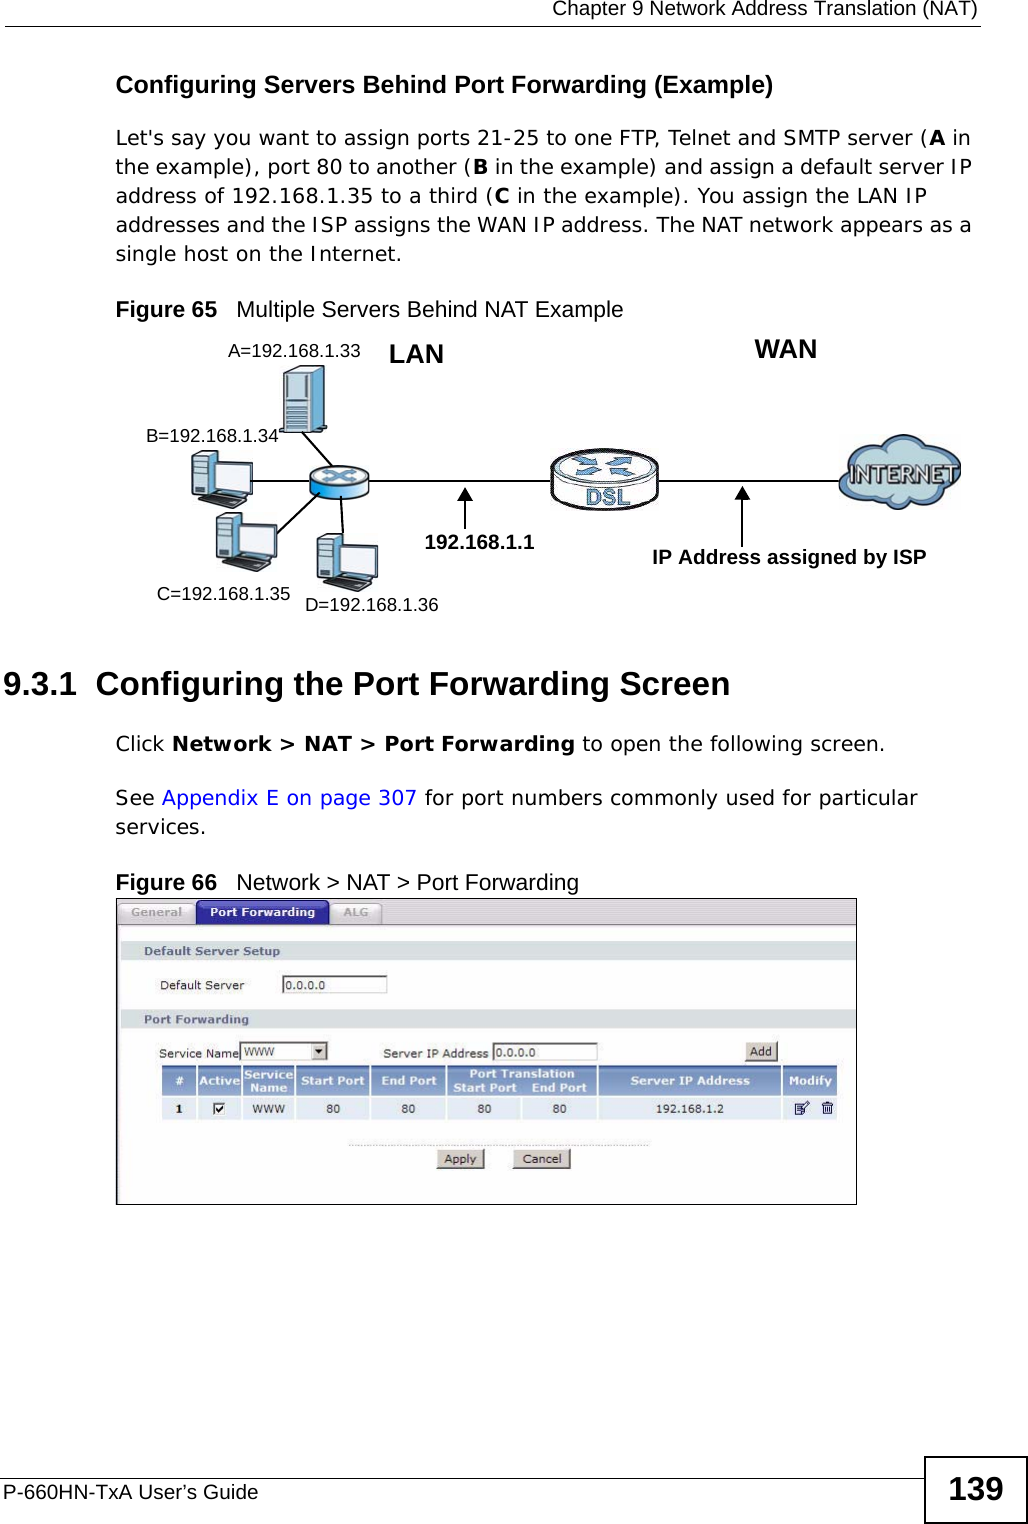  Chapter 9 Network Address Translation (NAT)P-660HN-TxA User’s Guide 139Configuring Servers Behind Port Forwarding (Example)Let&apos;s say you want to assign ports 21-25 to one FTP, Telnet and SMTP server (A in the example), port 80 to another (B in the example) and assign a default server IP address of 192.168.1.35 to a third (C in the example). You assign the LAN IP addresses and the ISP assigns the WAN IP address. The NAT network appears as a single host on the Internet.Figure 65   Multiple Servers Behind NAT Example9.3.1  Configuring the Port Forwarding ScreenClick Network &gt; NAT &gt; Port Forwarding to open the following screen.See Appendix E on page 307 for port numbers commonly used for particular services. Figure 66   Network &gt; NAT &gt; Port ForwardingA=192.168.1.33D=192.168.1.36C=192.168.1.35B=192.168.1.34WANLAN192.168.1.1 IP Address assigned by ISP